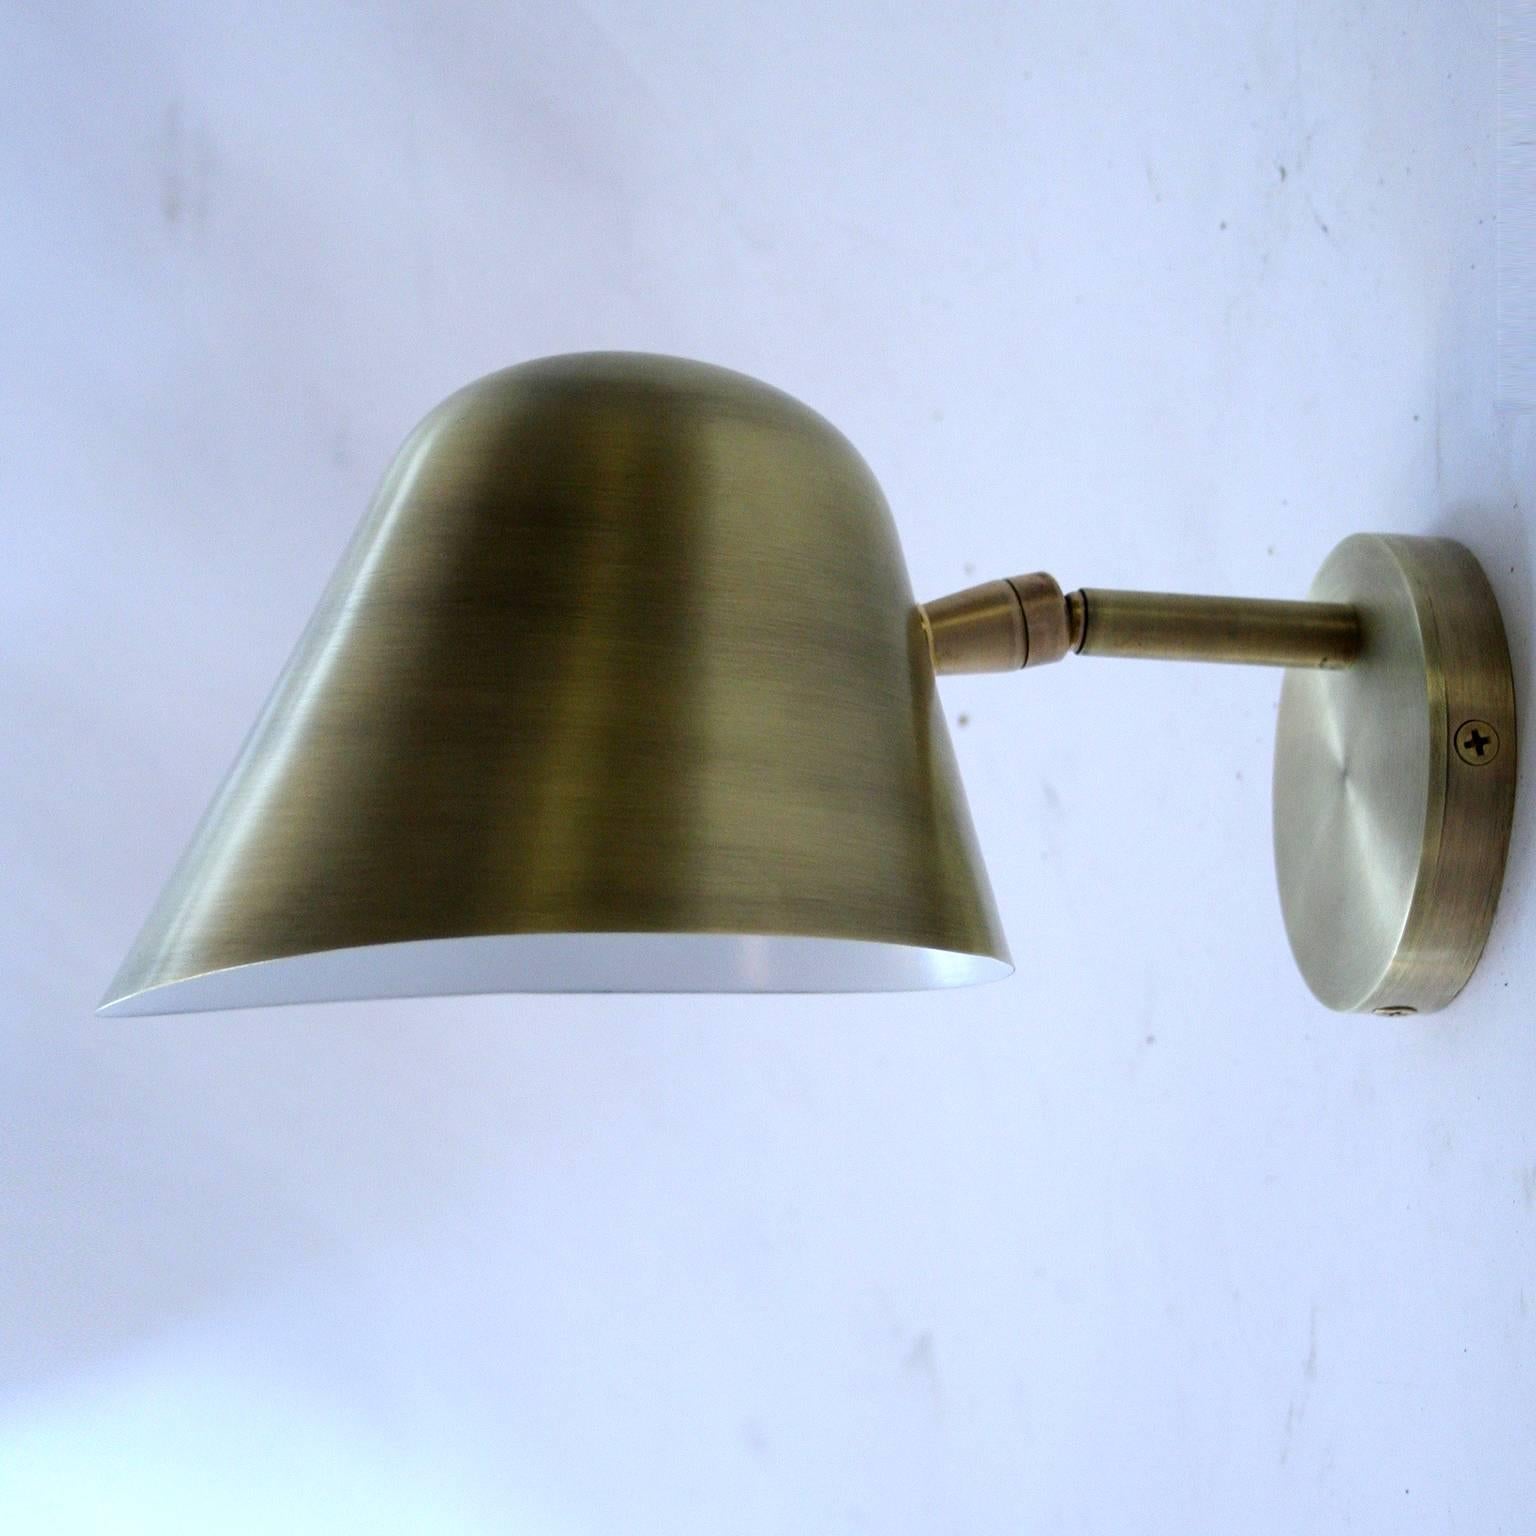 Rounded top, articulated sconce with slightly curved and flared bottom in shown in antique brass - other options available. 
Sustainable, 100% Recyclable, Zero Child Labor, 100% Made in USA
Made in our Tribeca studio and showroom in NYC.

Brass